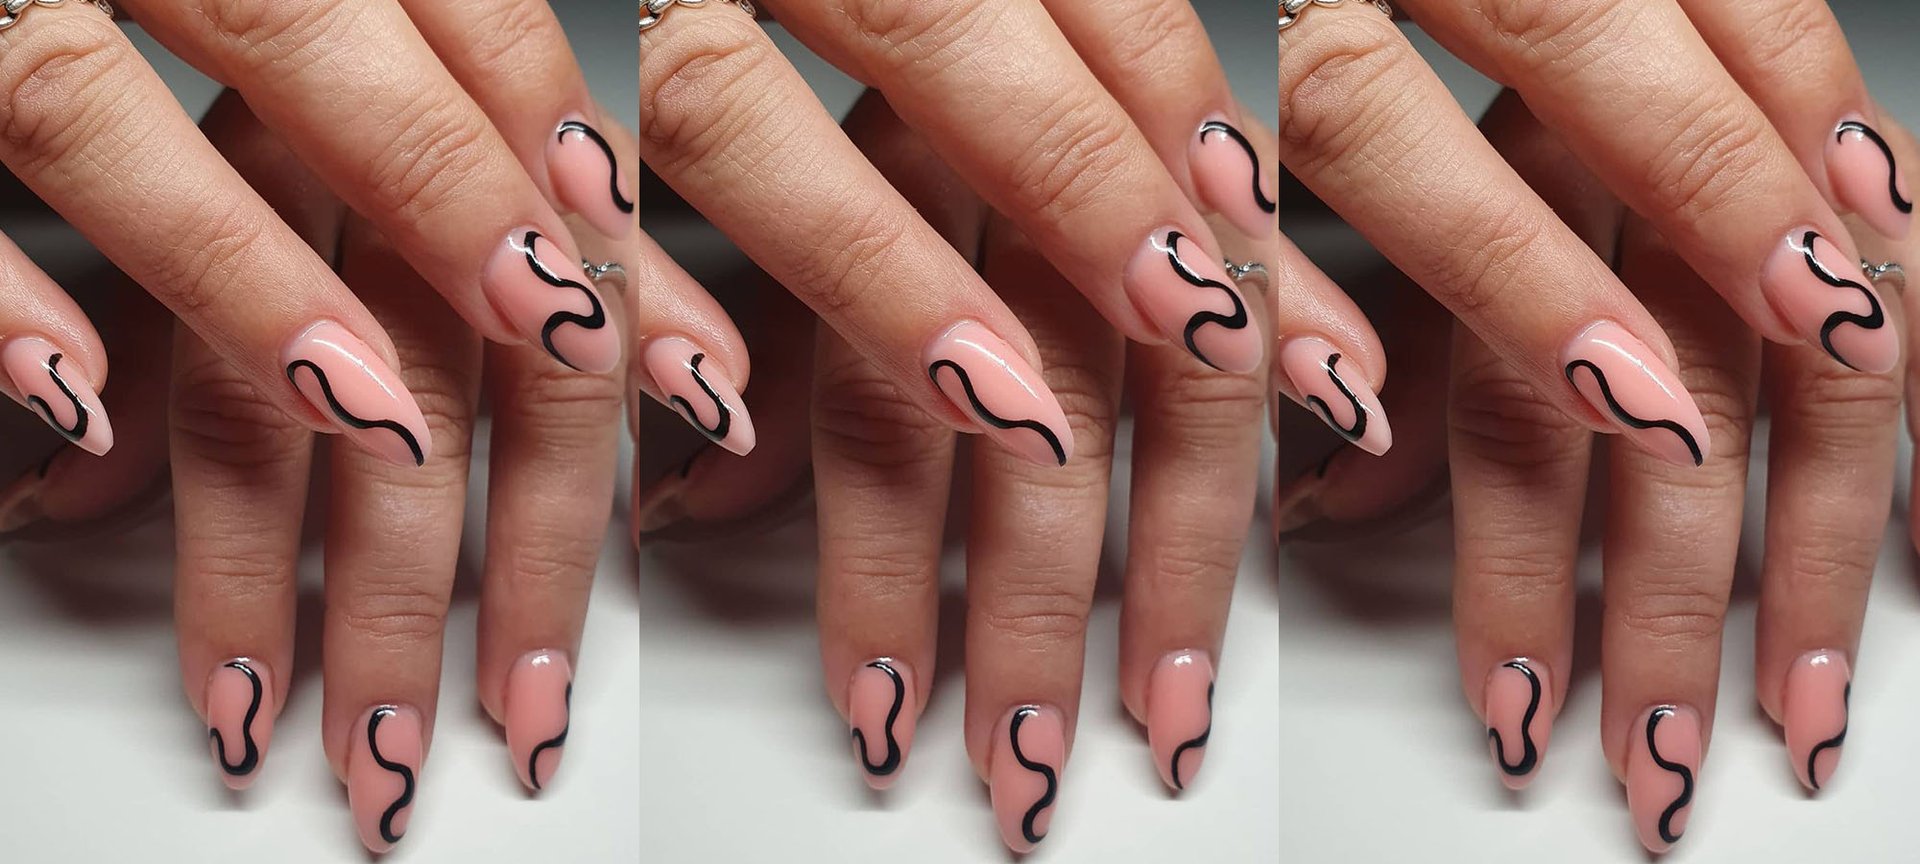 Hot Pink And Black Nail Designs That Are Truly Amazing 13392 | Hot Sex  Picture